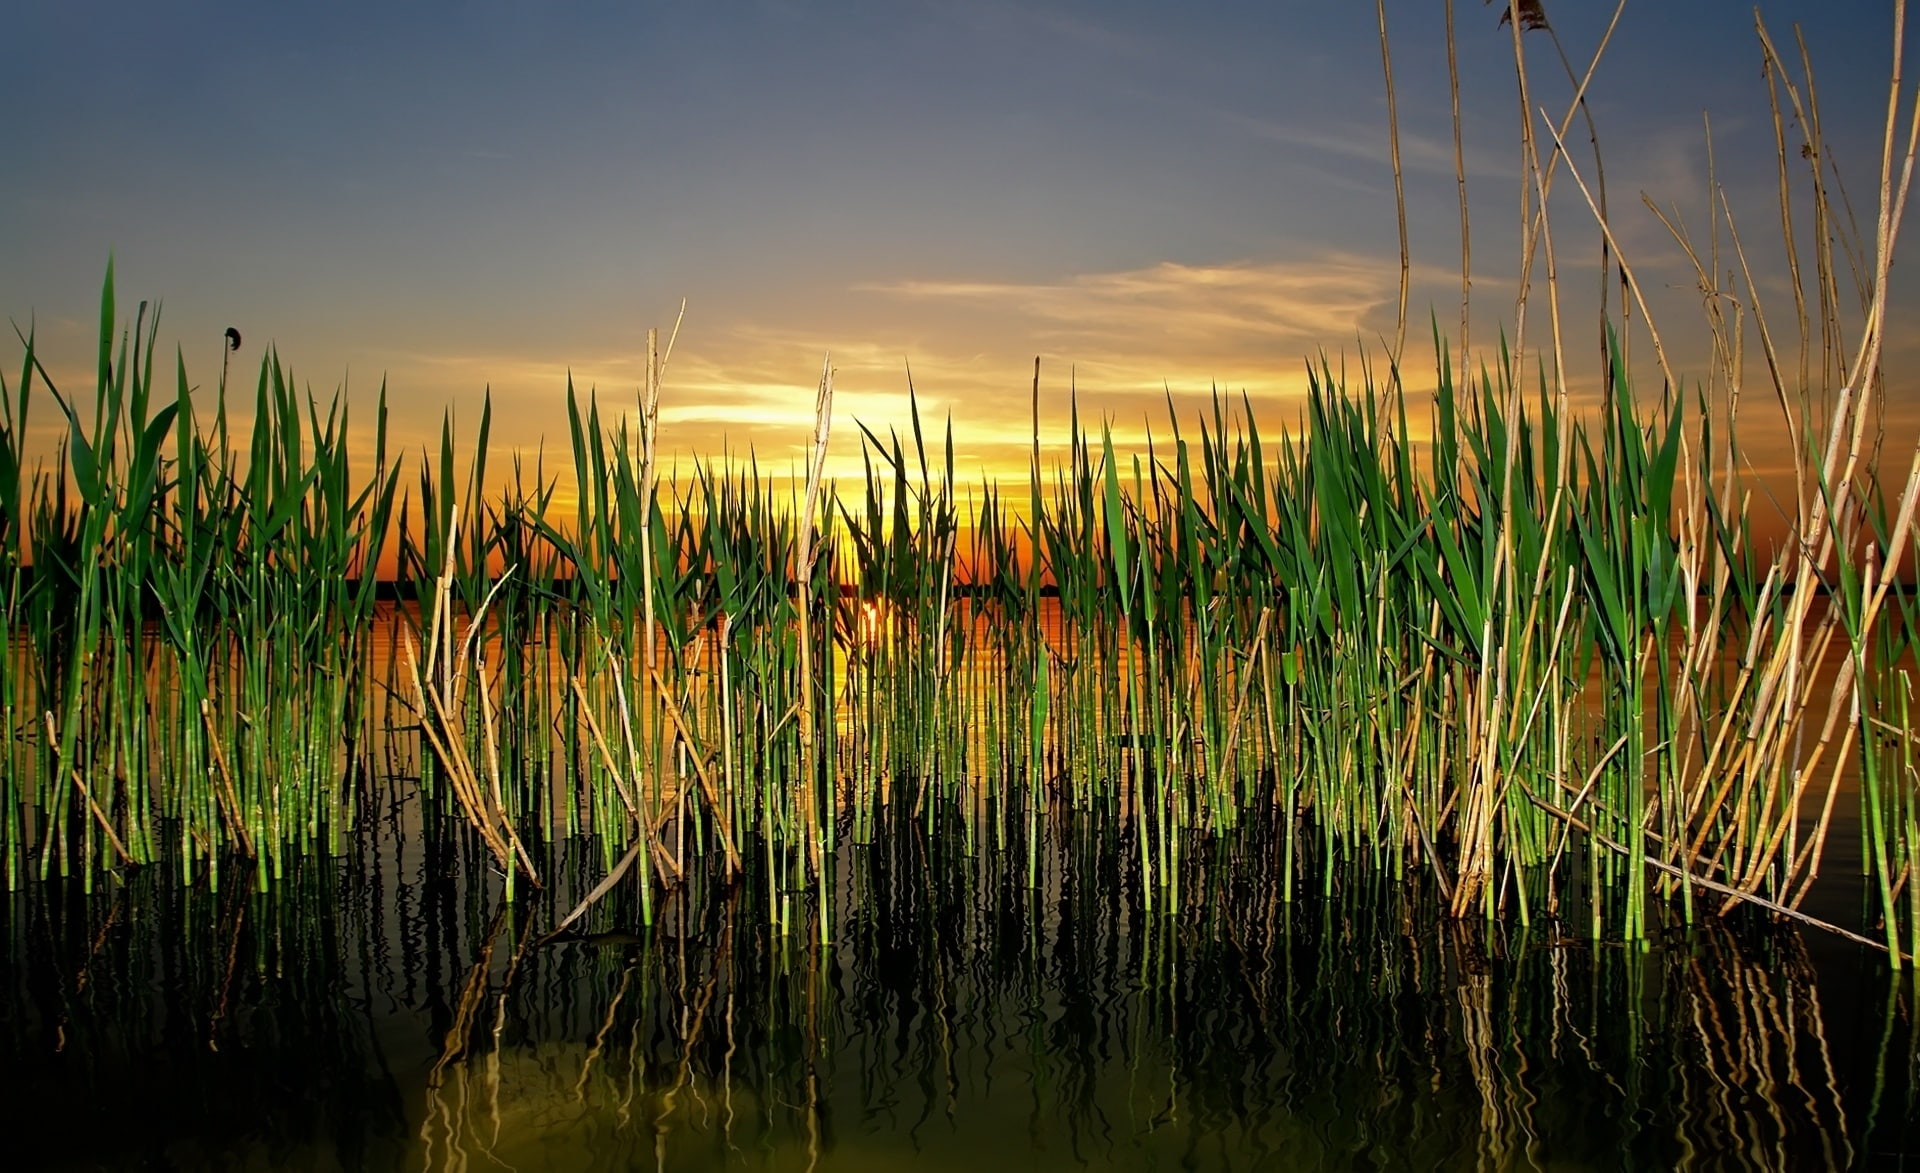 Cattails In Pond, green leafed plants, Nature, Lakes, sky, tranquility